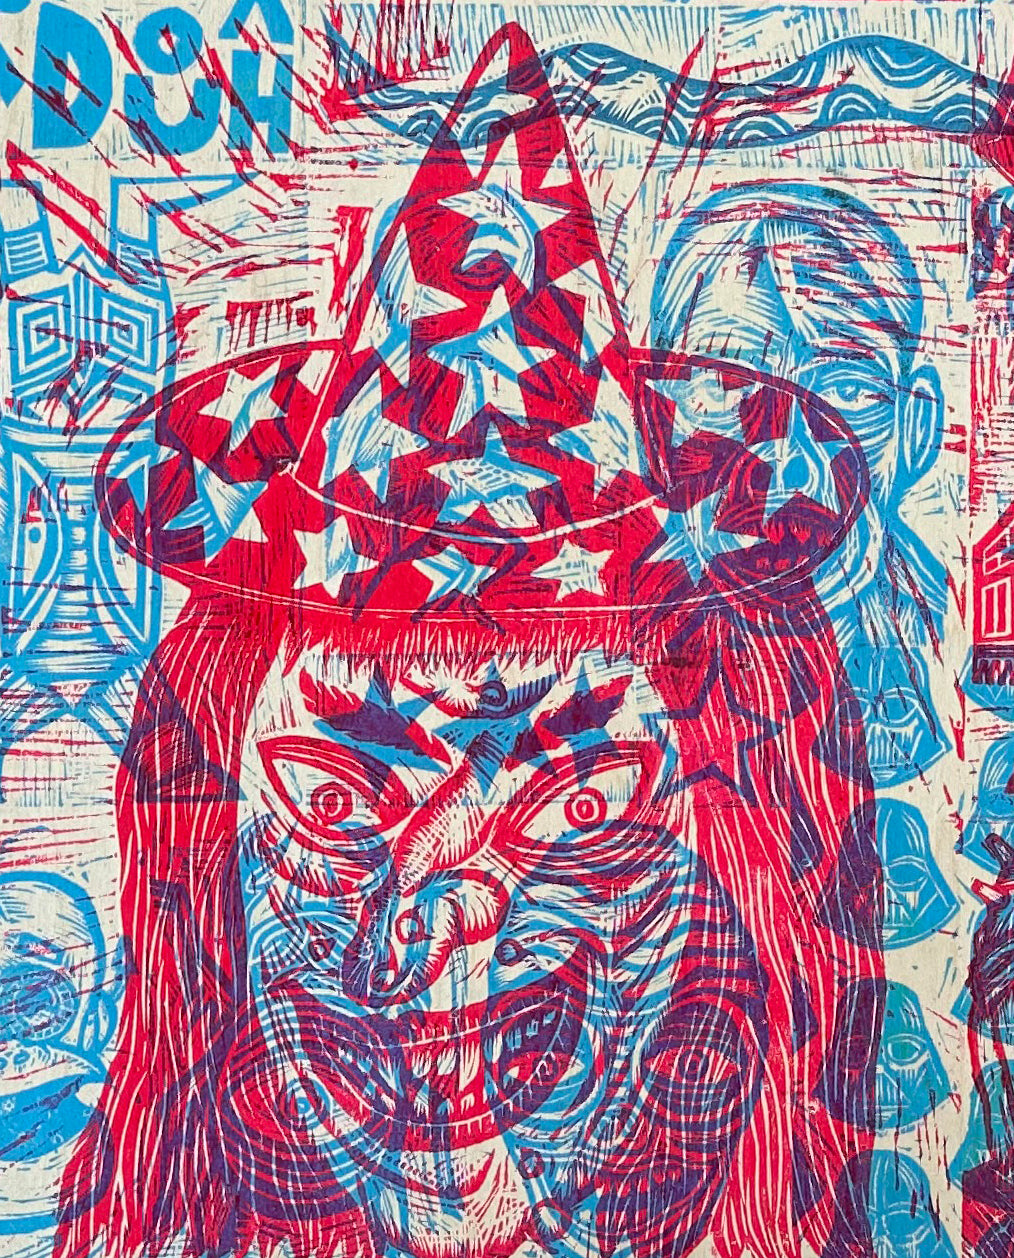 Multiple Red and Blue  Woodcuts Printed on Wooden Panel (Panel A)